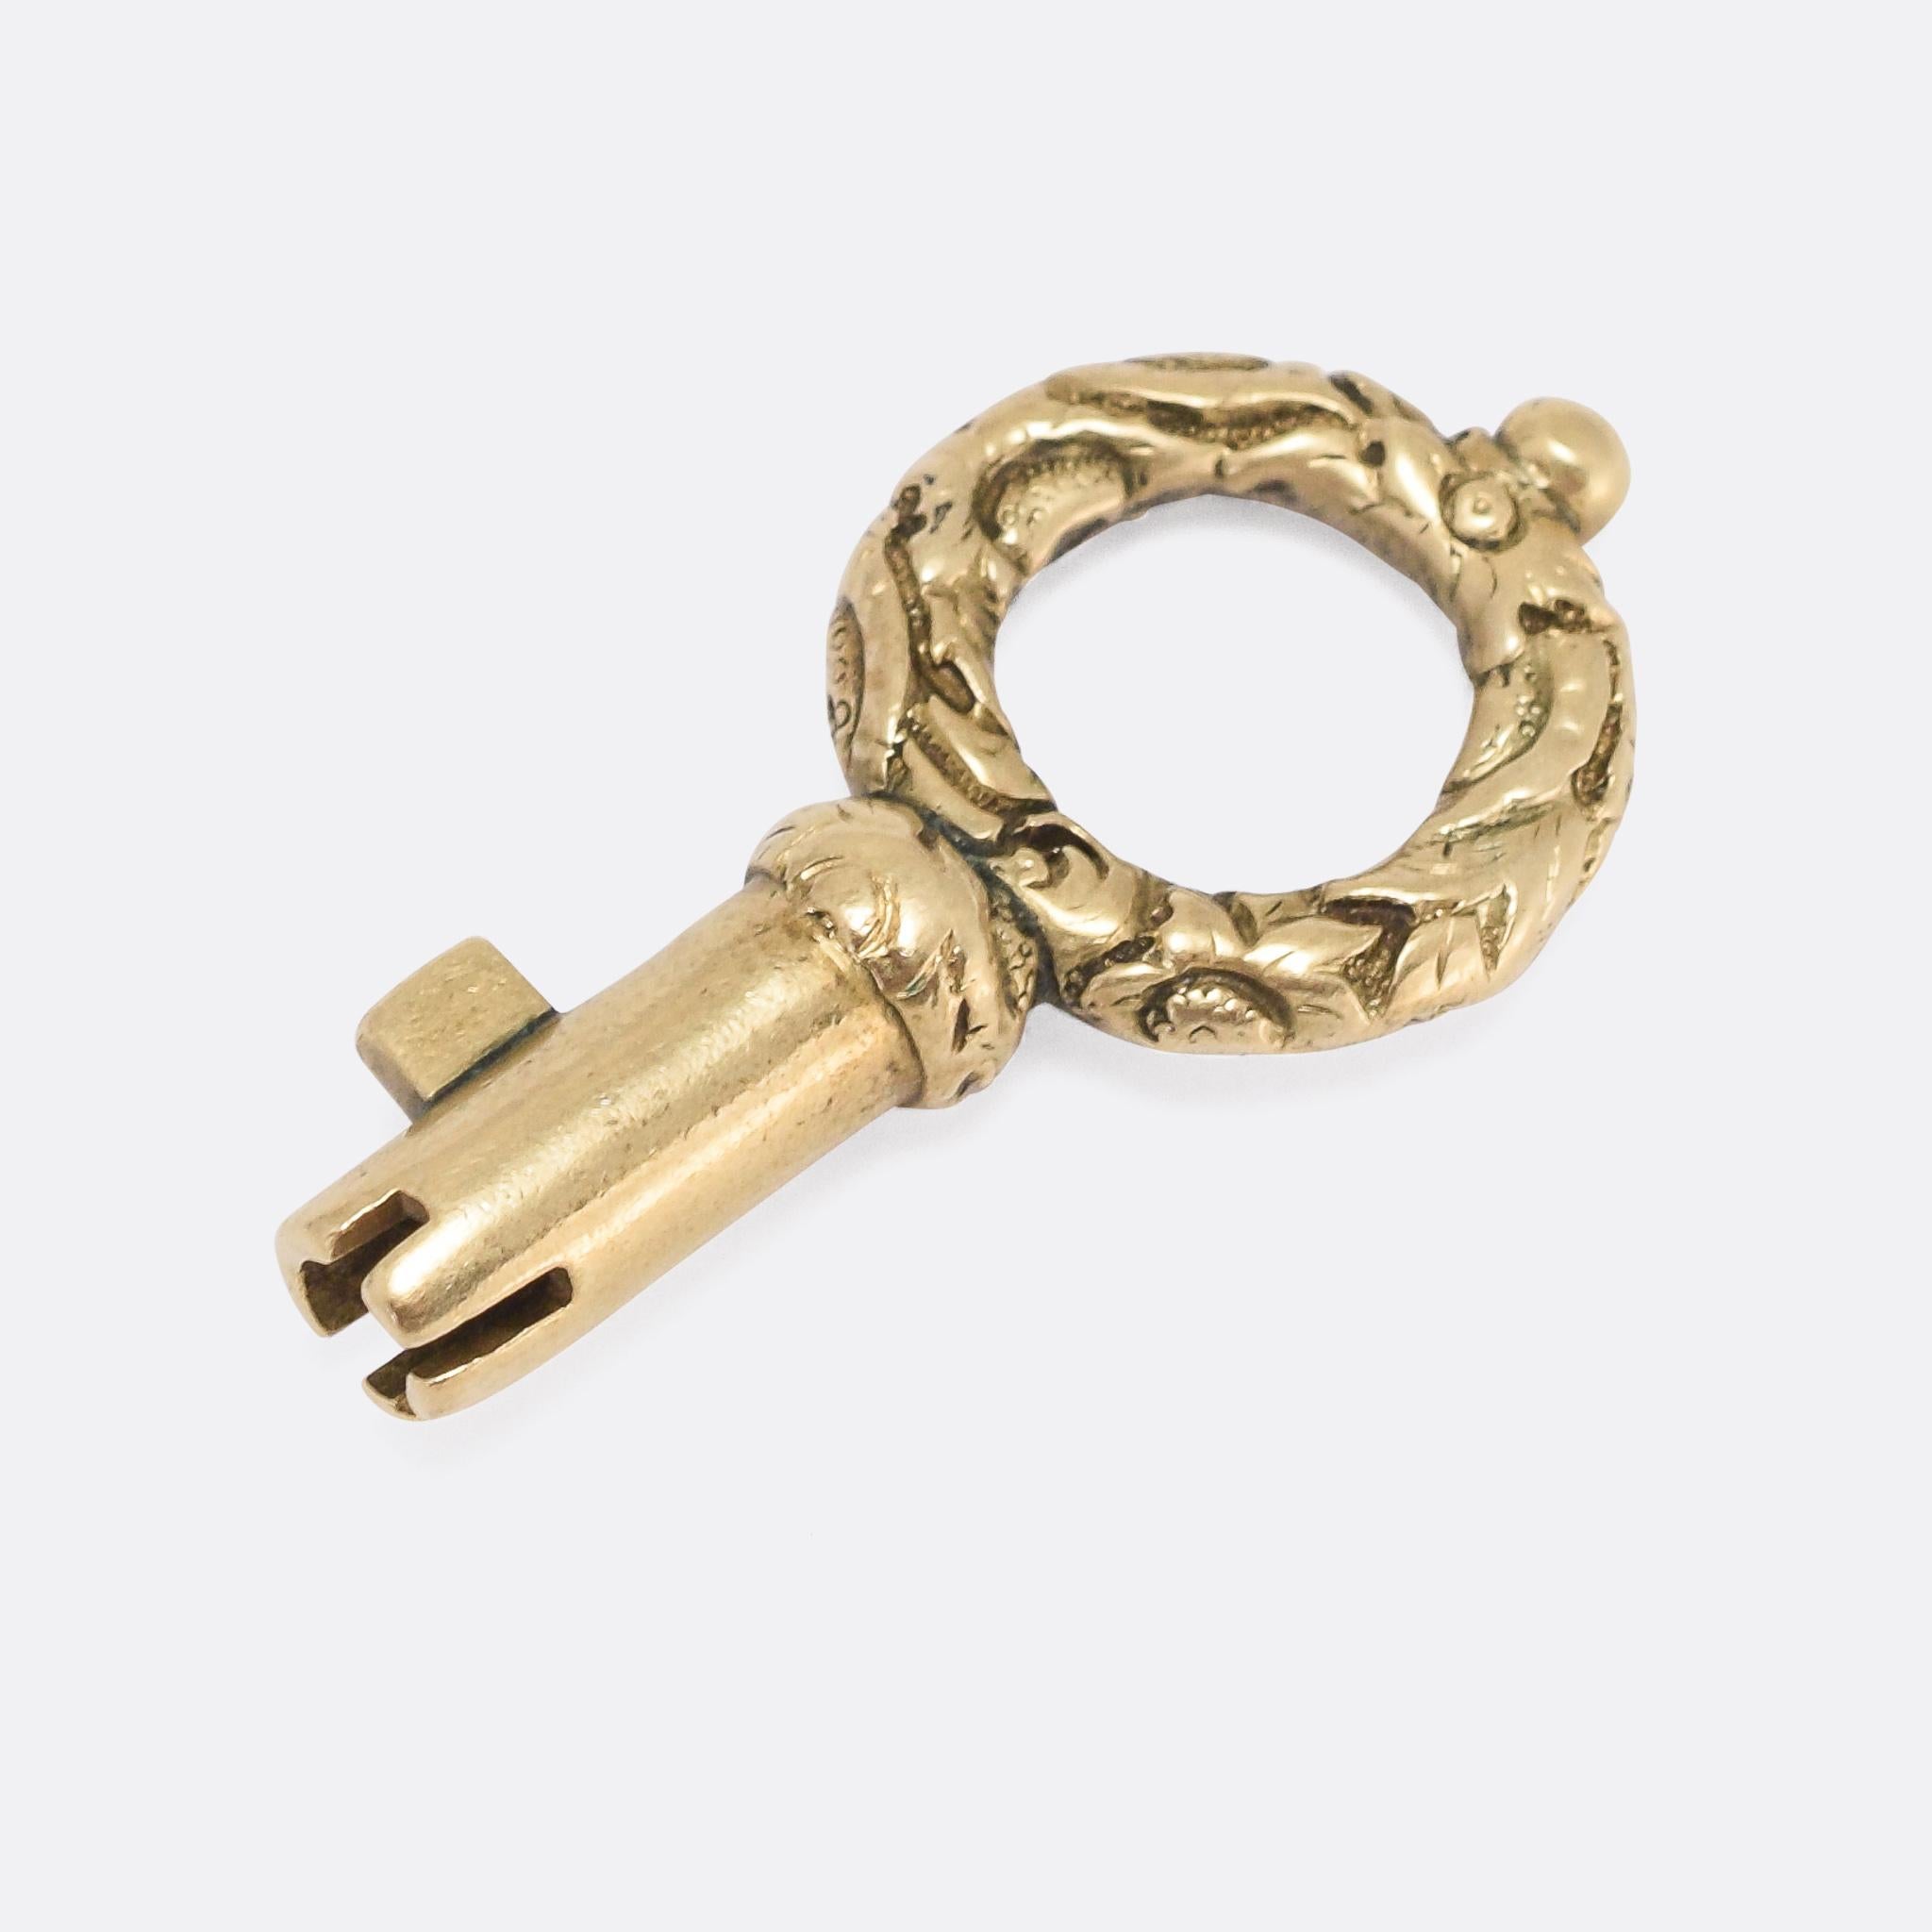 A cool Georgian gold Bramah key with ornate chased head. It dates from the early 18th Century, modelled in 9 karat gold, and was likely the key to a jewellery box.

The Bramah lock was invented by Joseph Bramah in 1784, and features a cylindrical